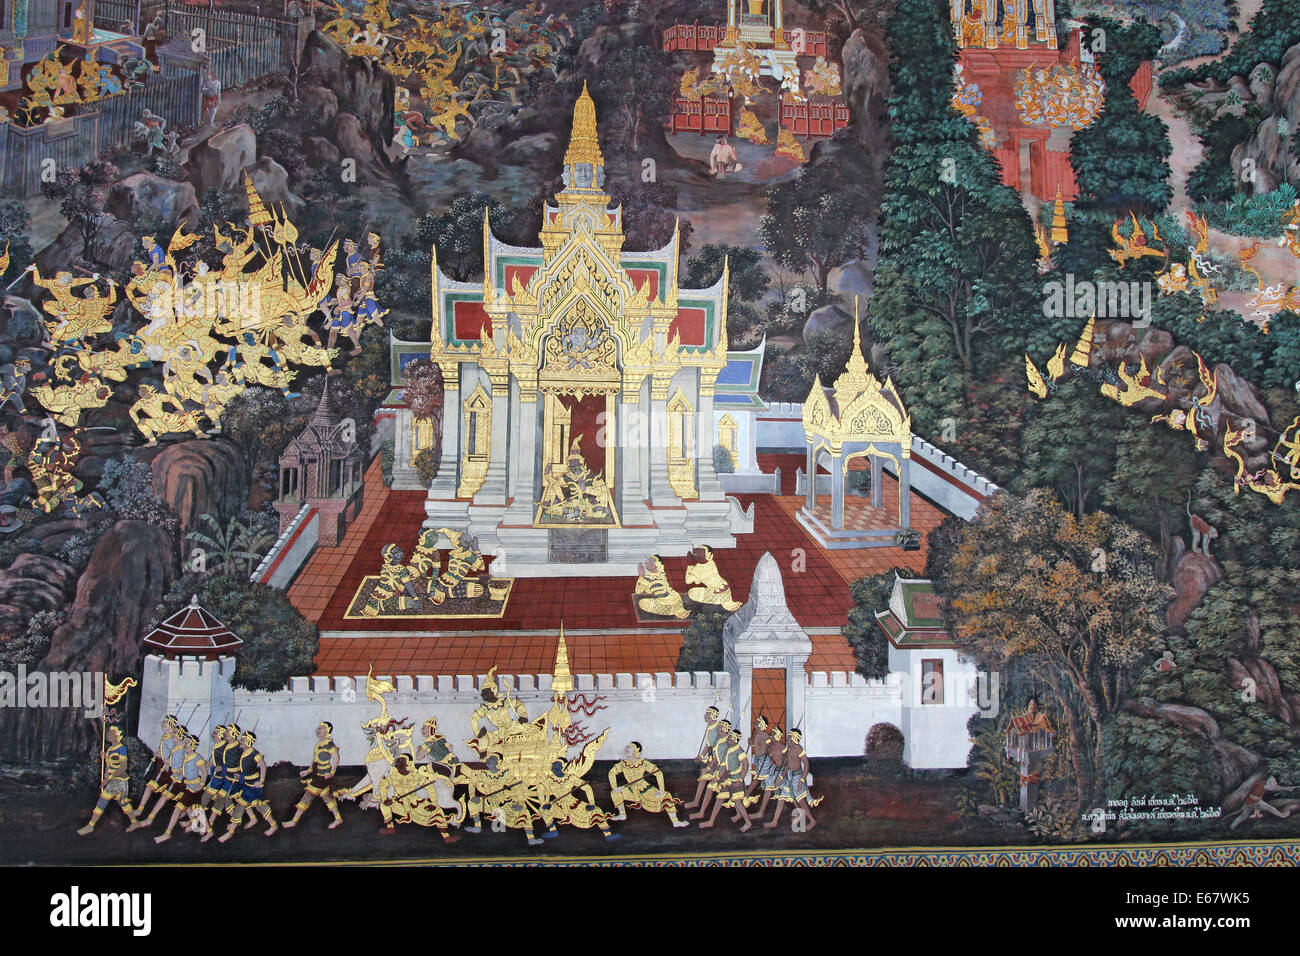 Part of the mural in the Ramakien Cloisters at Wat Phra Kaew in the Grand Palace complex in Bangkok, Thailand Stock Photo